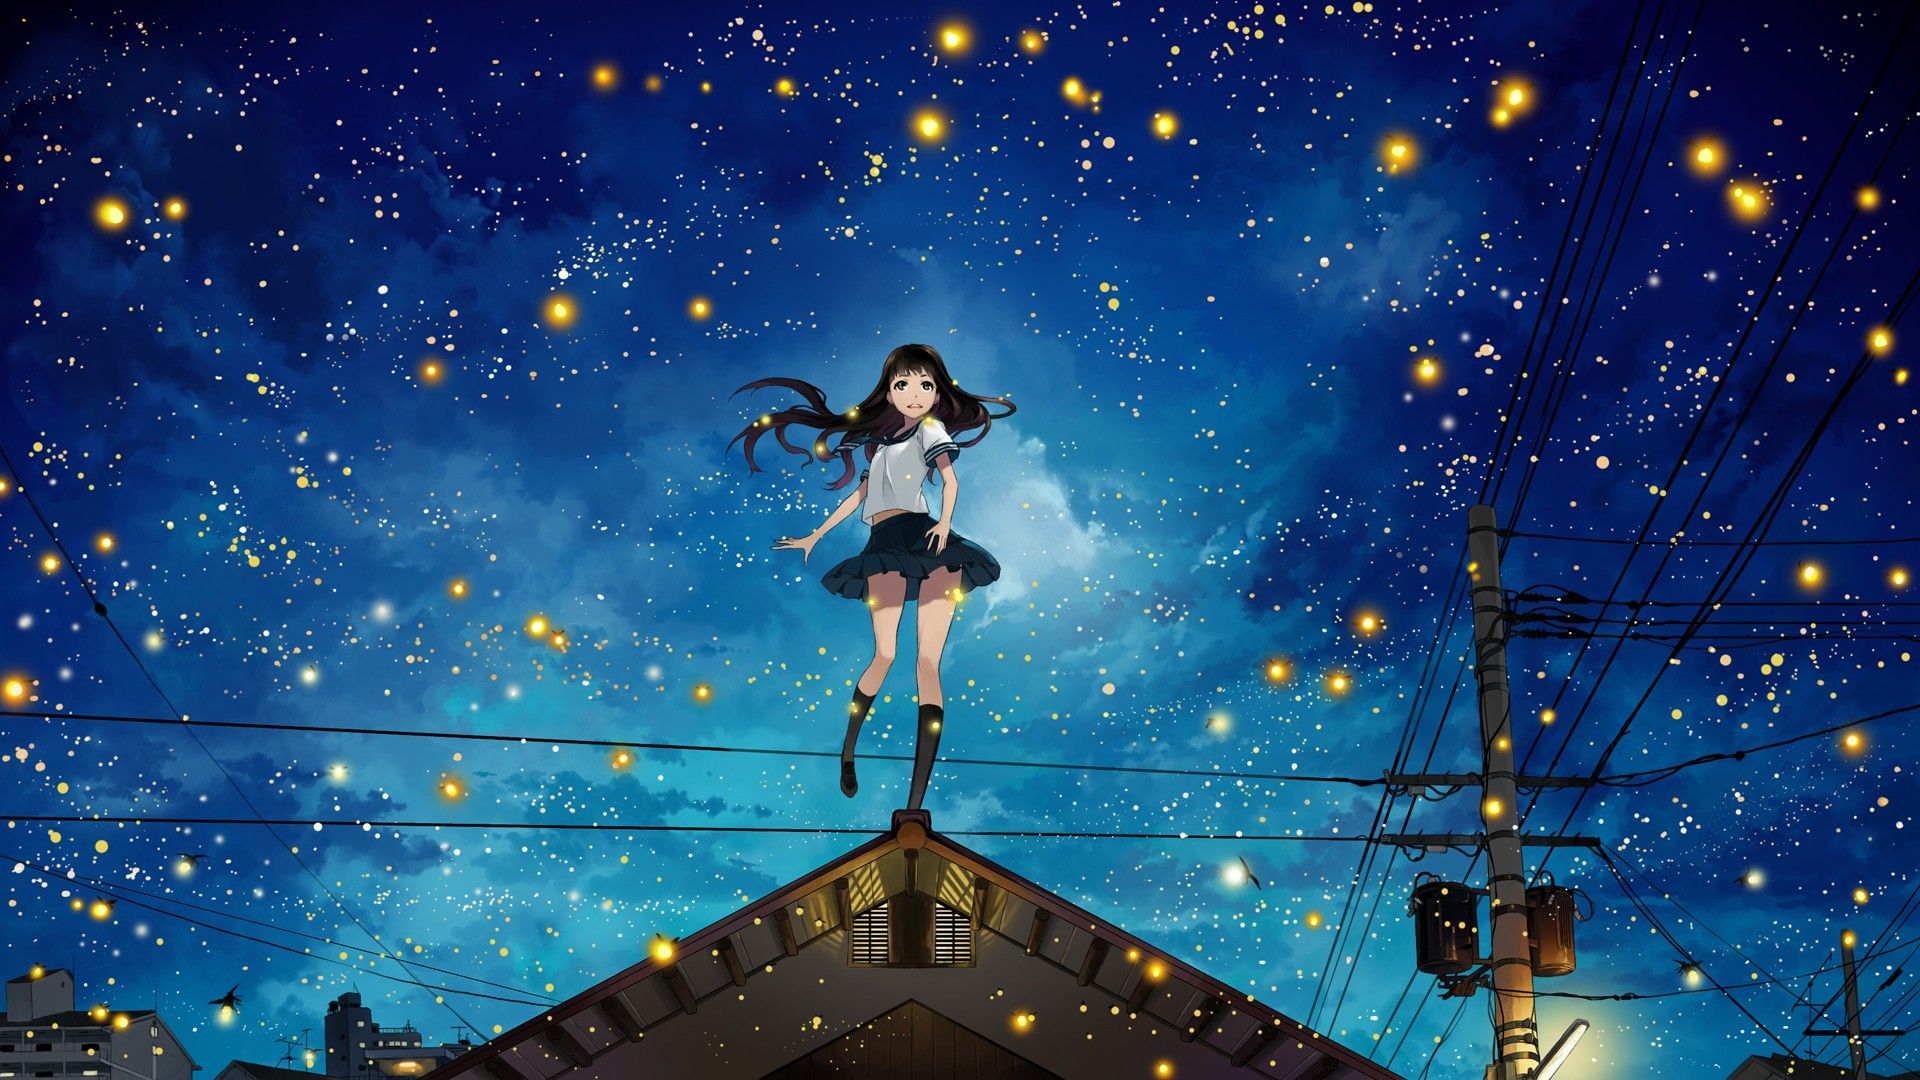 Free download Photo Collection Anime Night Sky With [1920x1080] for your Desktop, Mobile & Tablet. Explore Anime Sky Wallpaper. Anime Sky Wallpaper, Sky Wallpaper, Sky Background